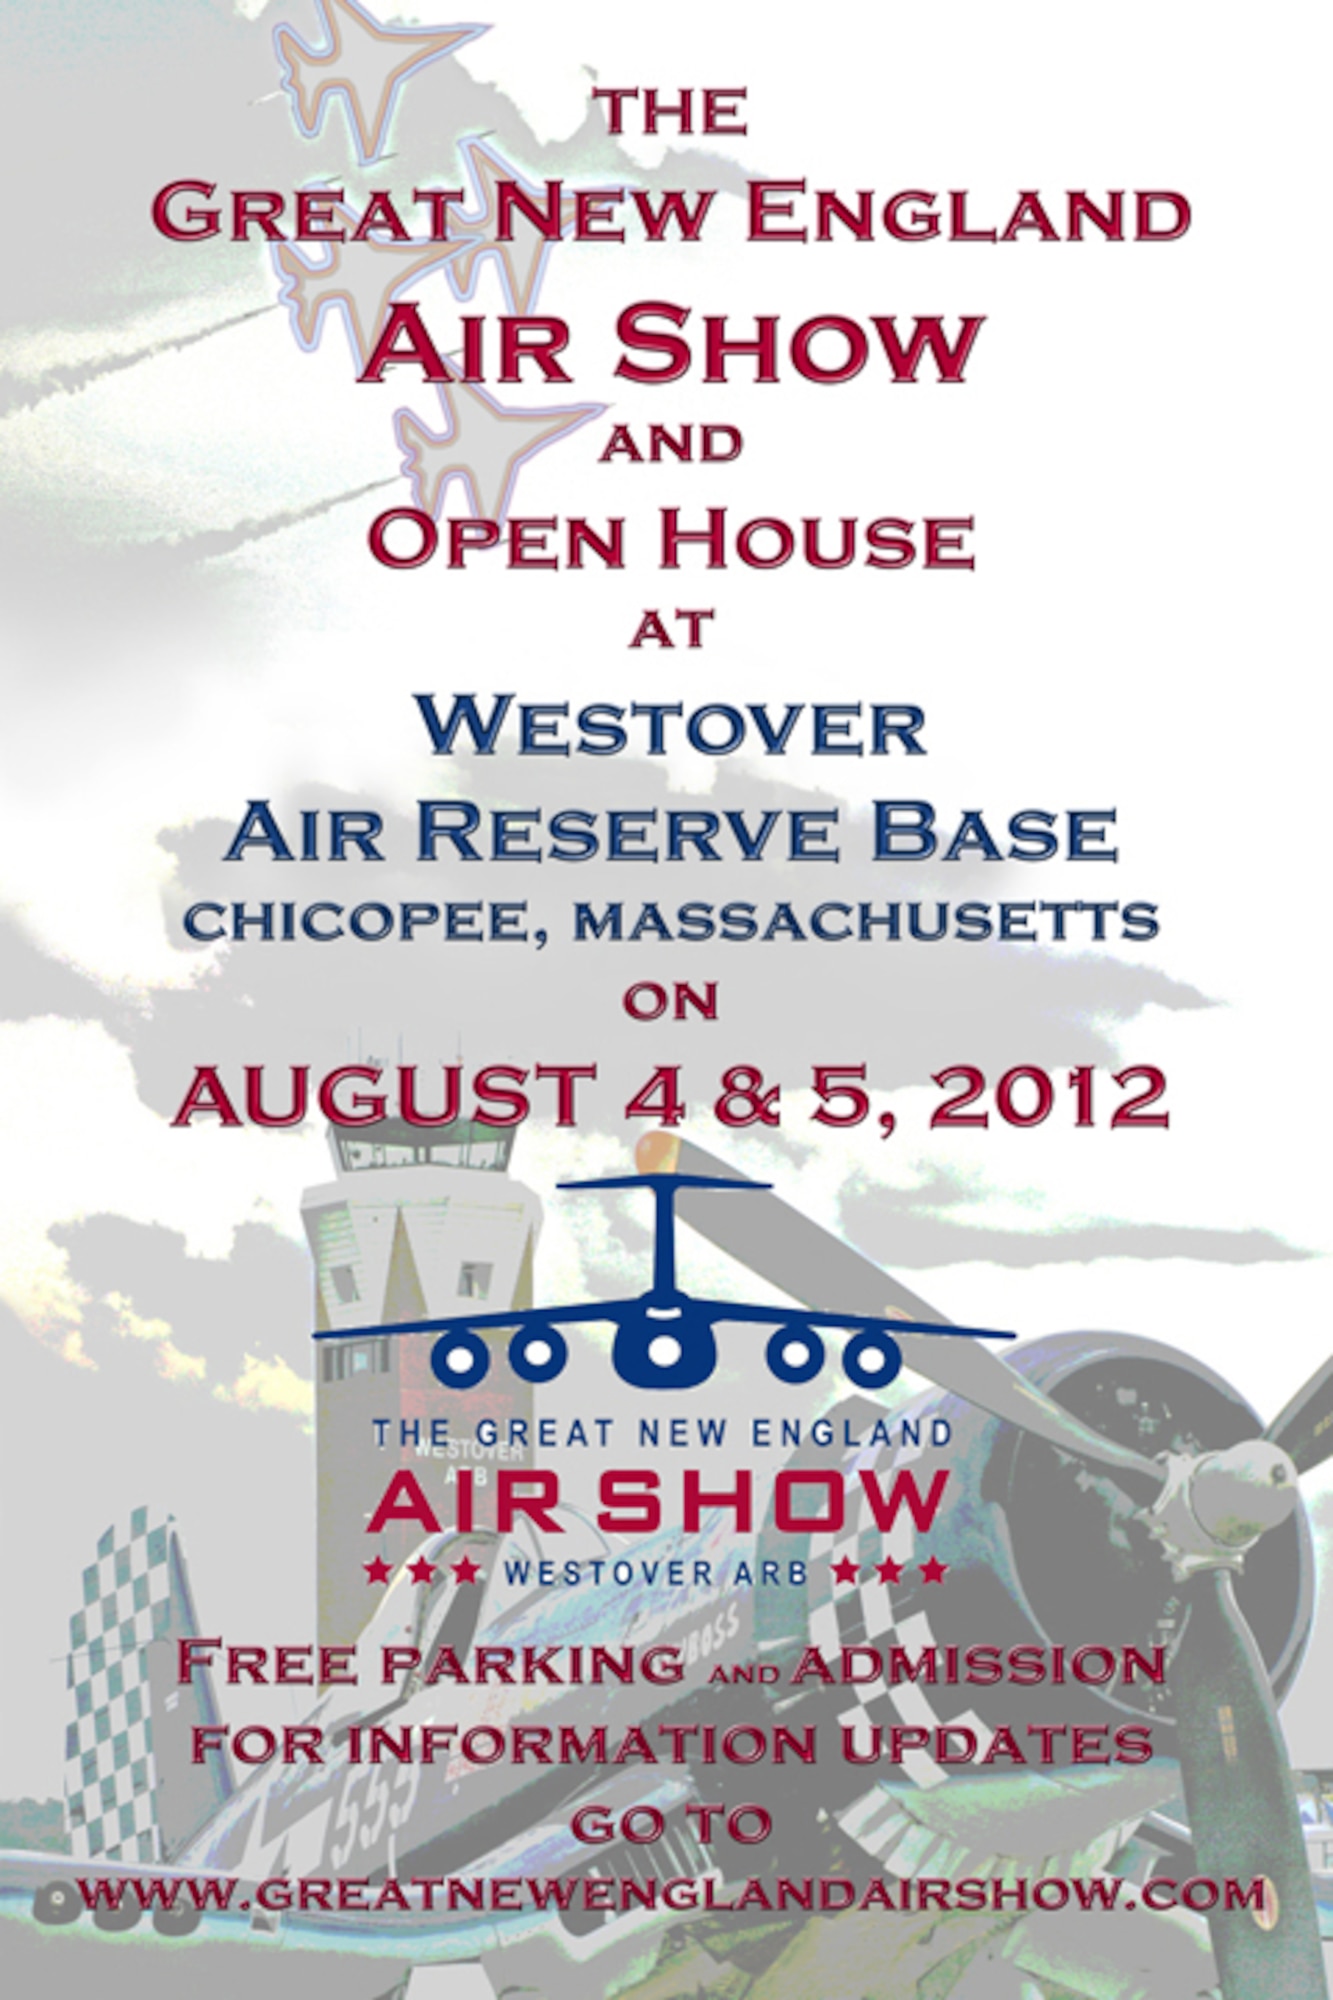 The Great New England Air Show and Open House at Westover Air Reserve Base Chicopee, Massachusetts set to be held on August 4th & 5th, 2012.